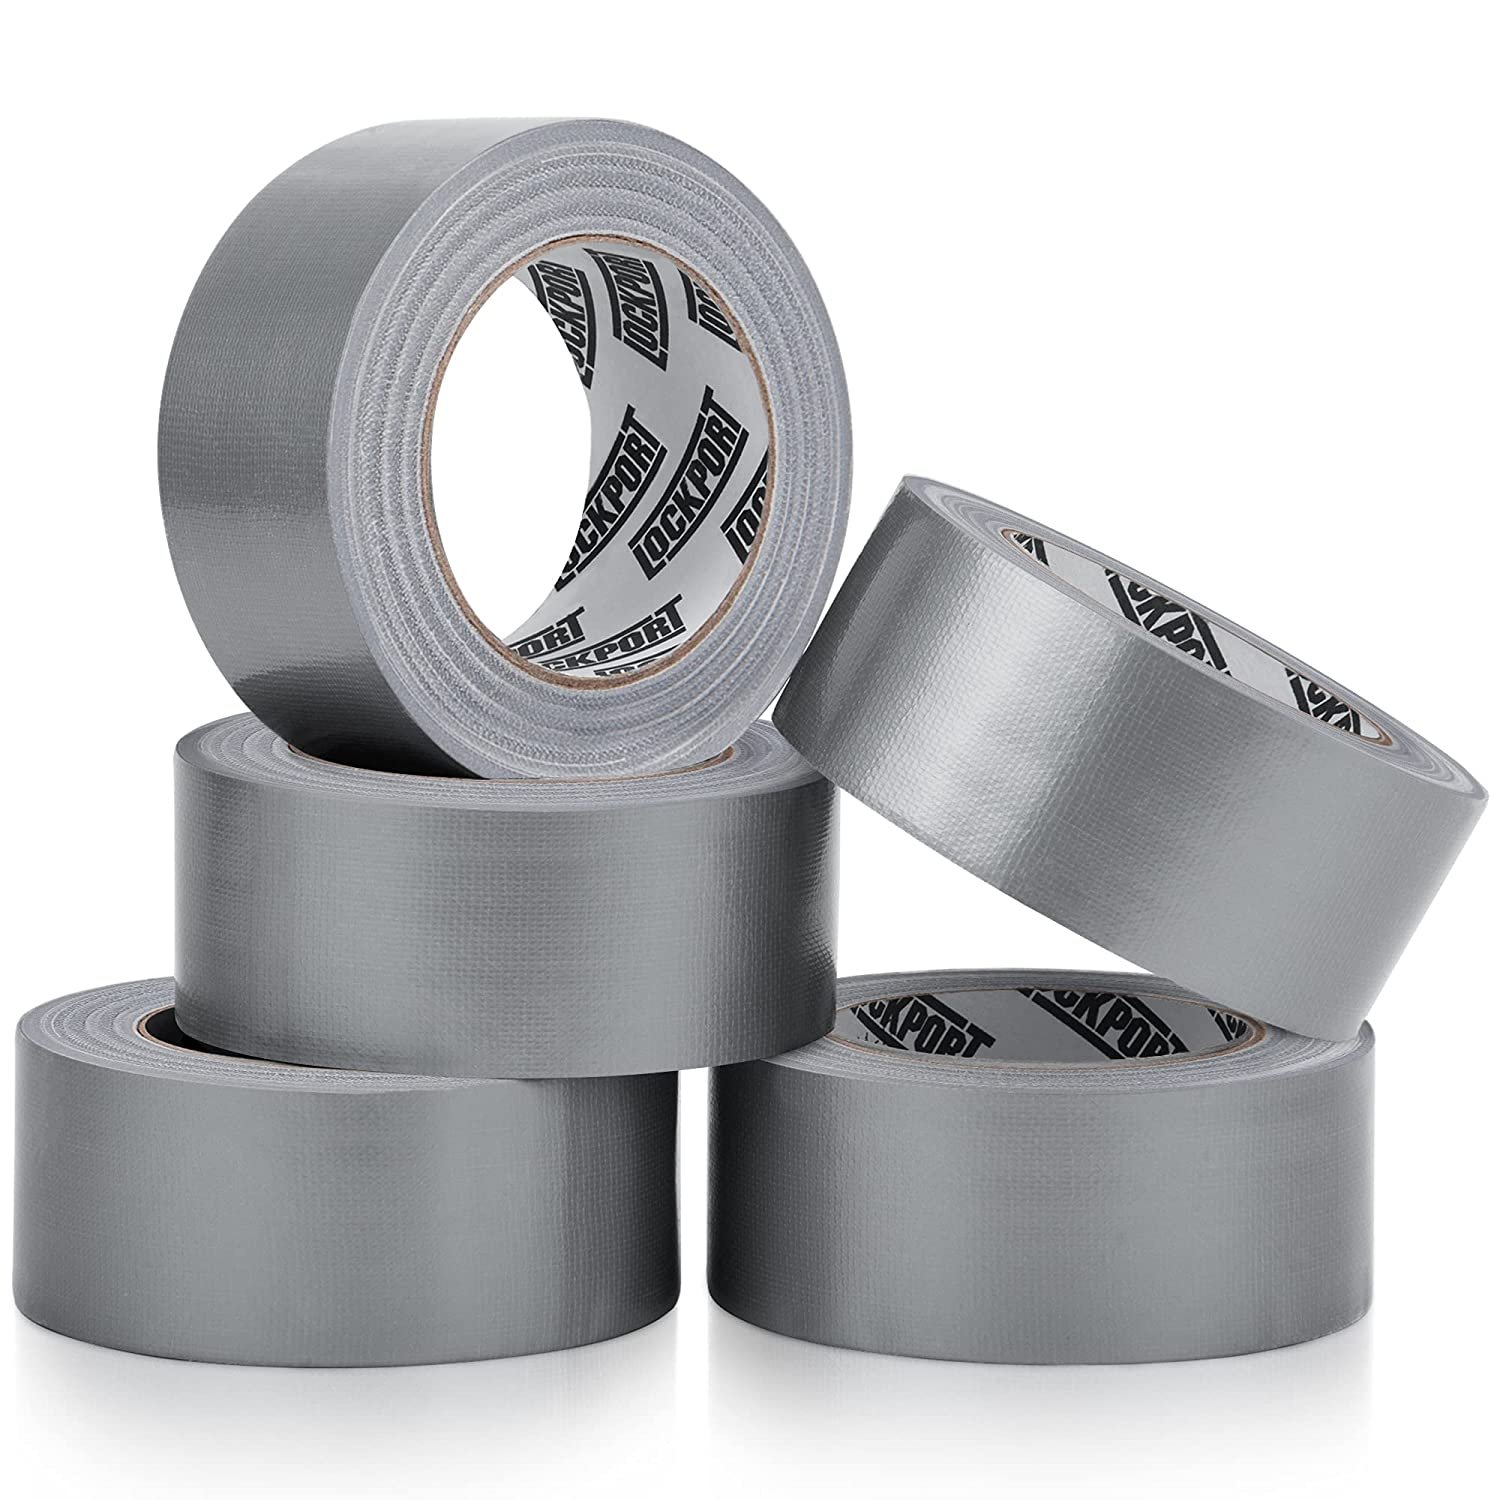 Duct Tape Heavy Duty - 5 Roll Multi Pack - Silver 90 Feet X 2 Inch - Strong, Flexible, No Residue,